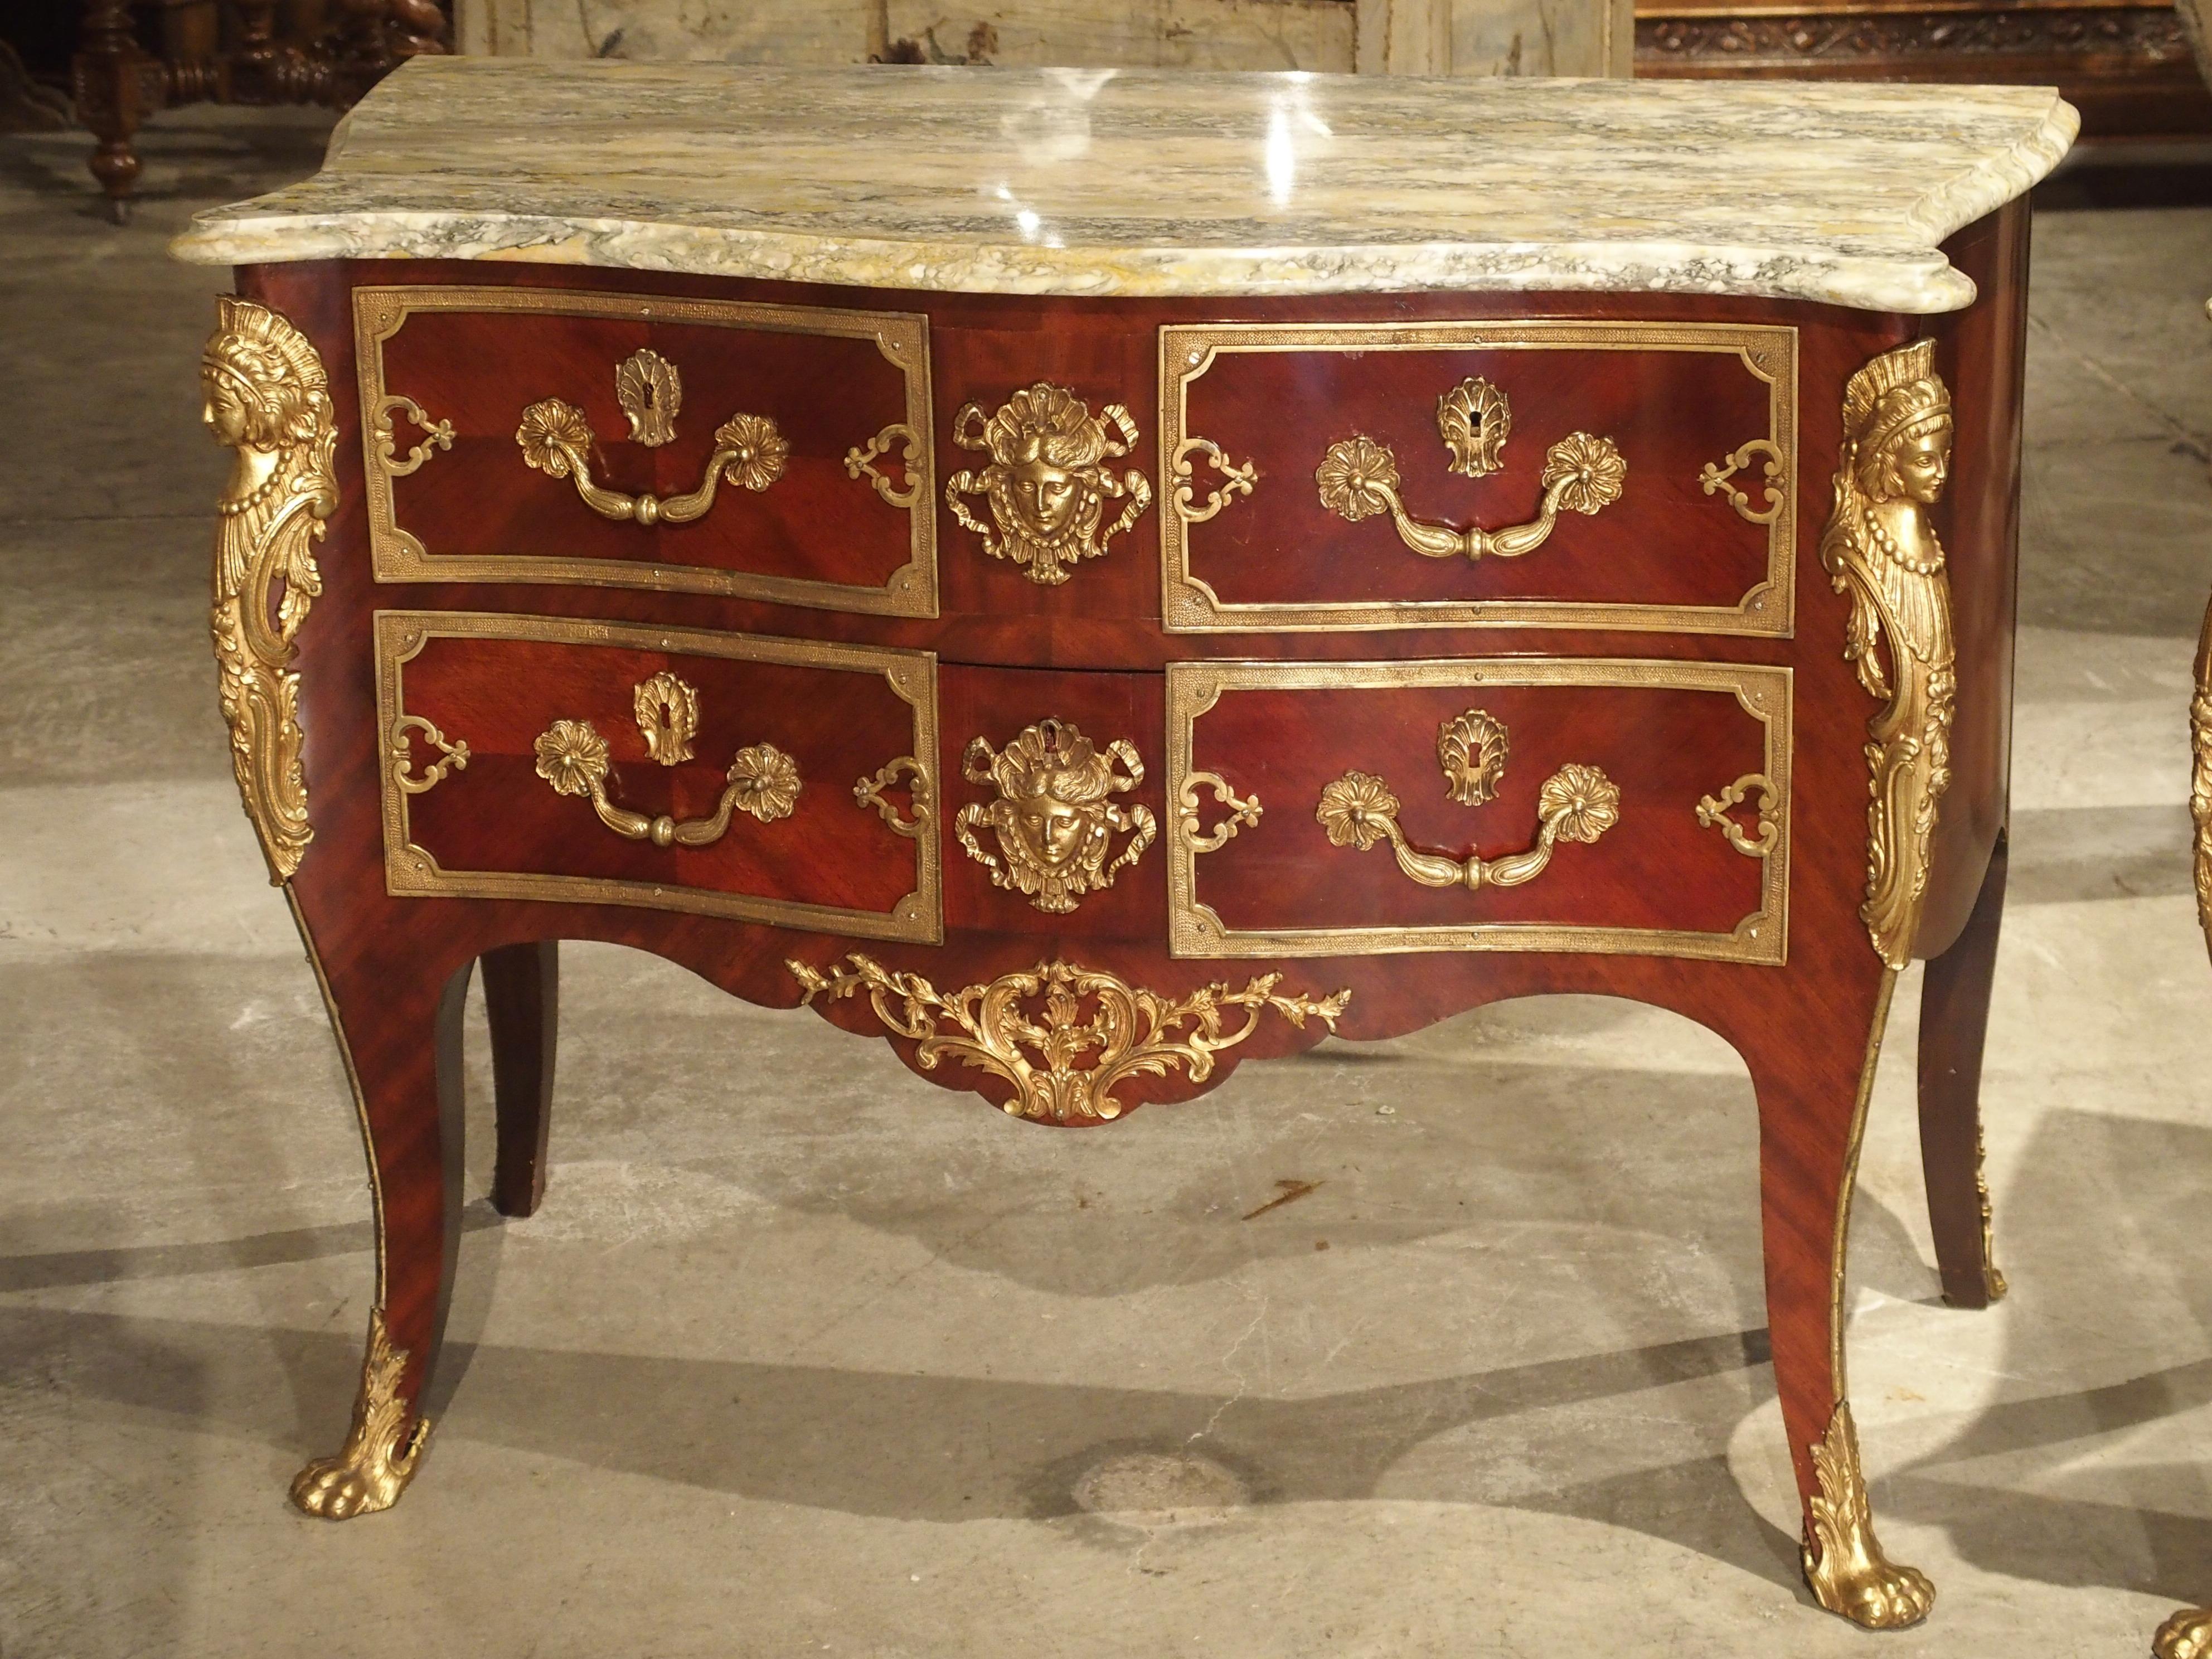 20th Century Pair of Early 1900s Mahogany and Gilt Bronze Mounted Louis XV Style Commodes